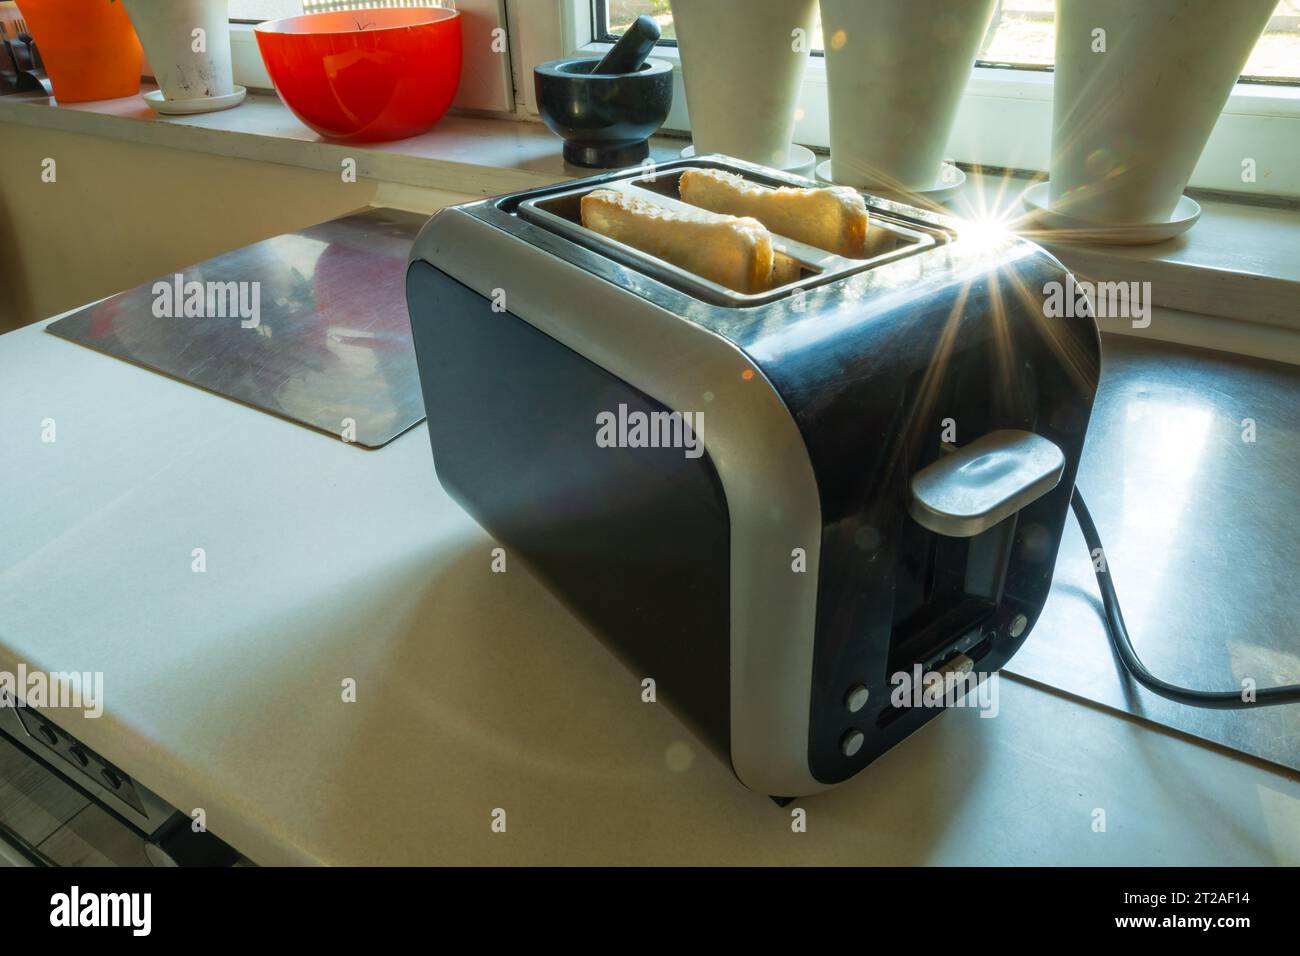 A toaster with slices of toast standing on the kitchen counter in sunny day Stock Photo